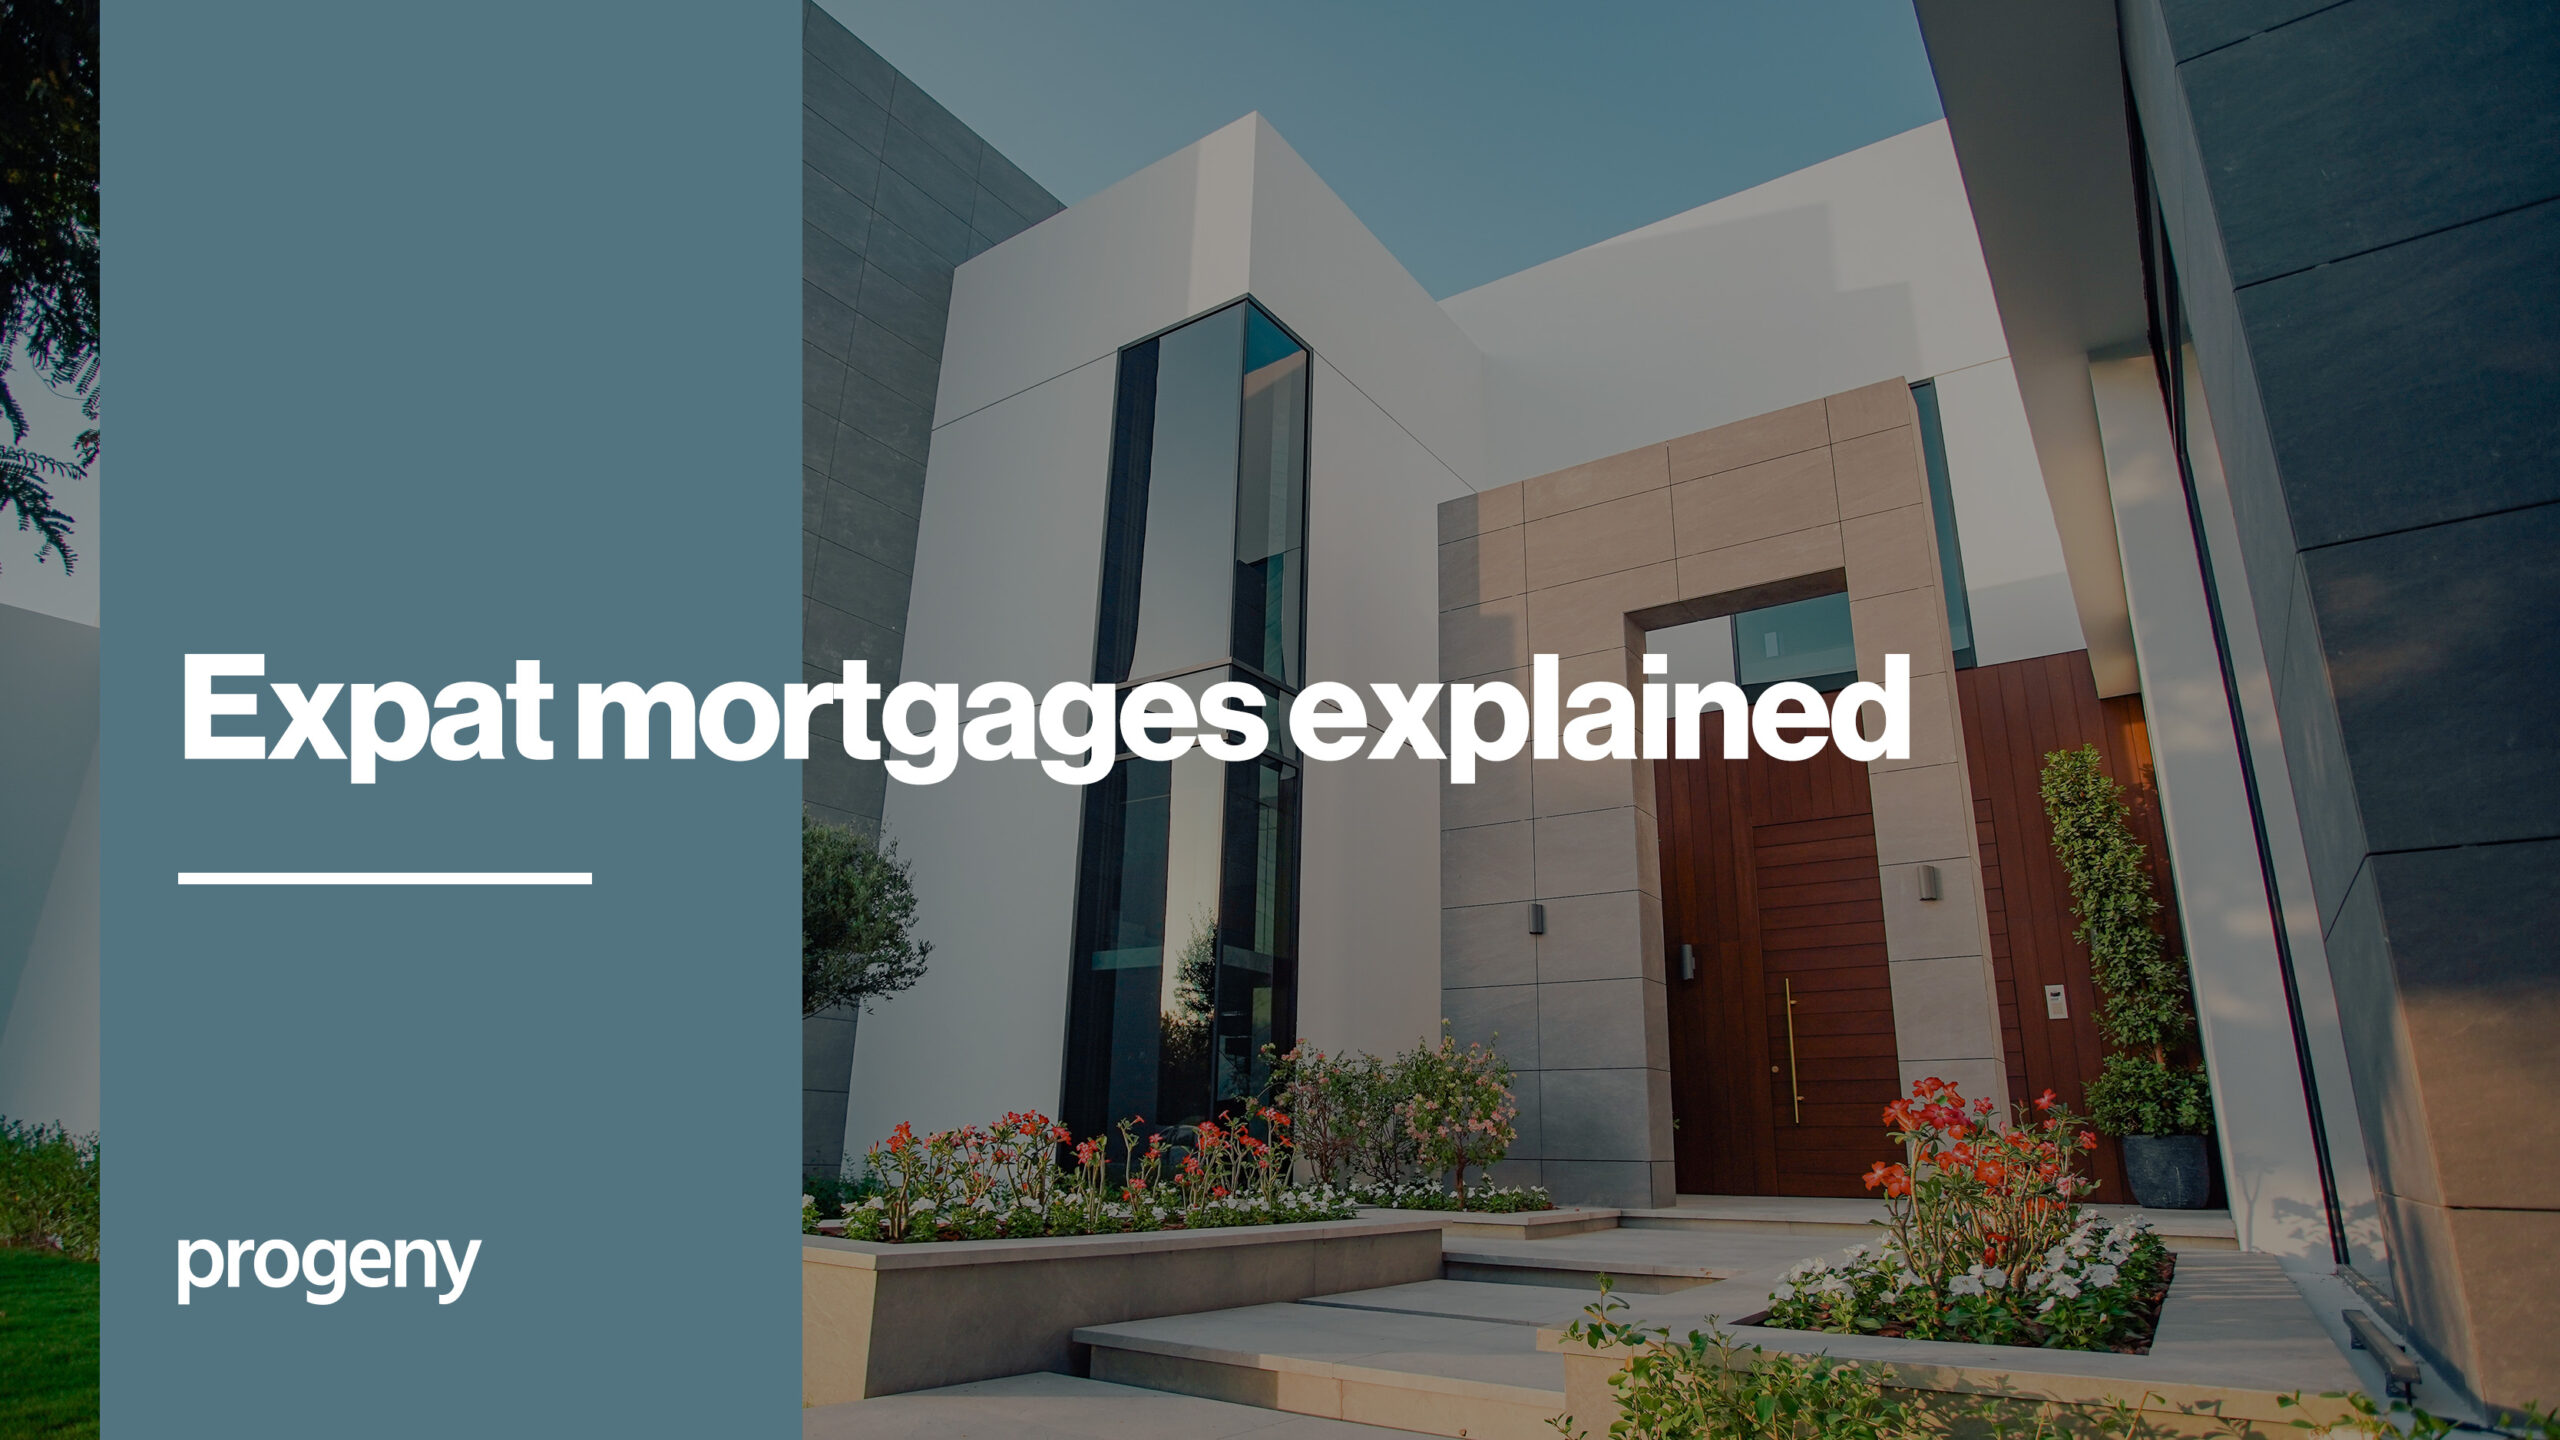 Expat mortgages explained